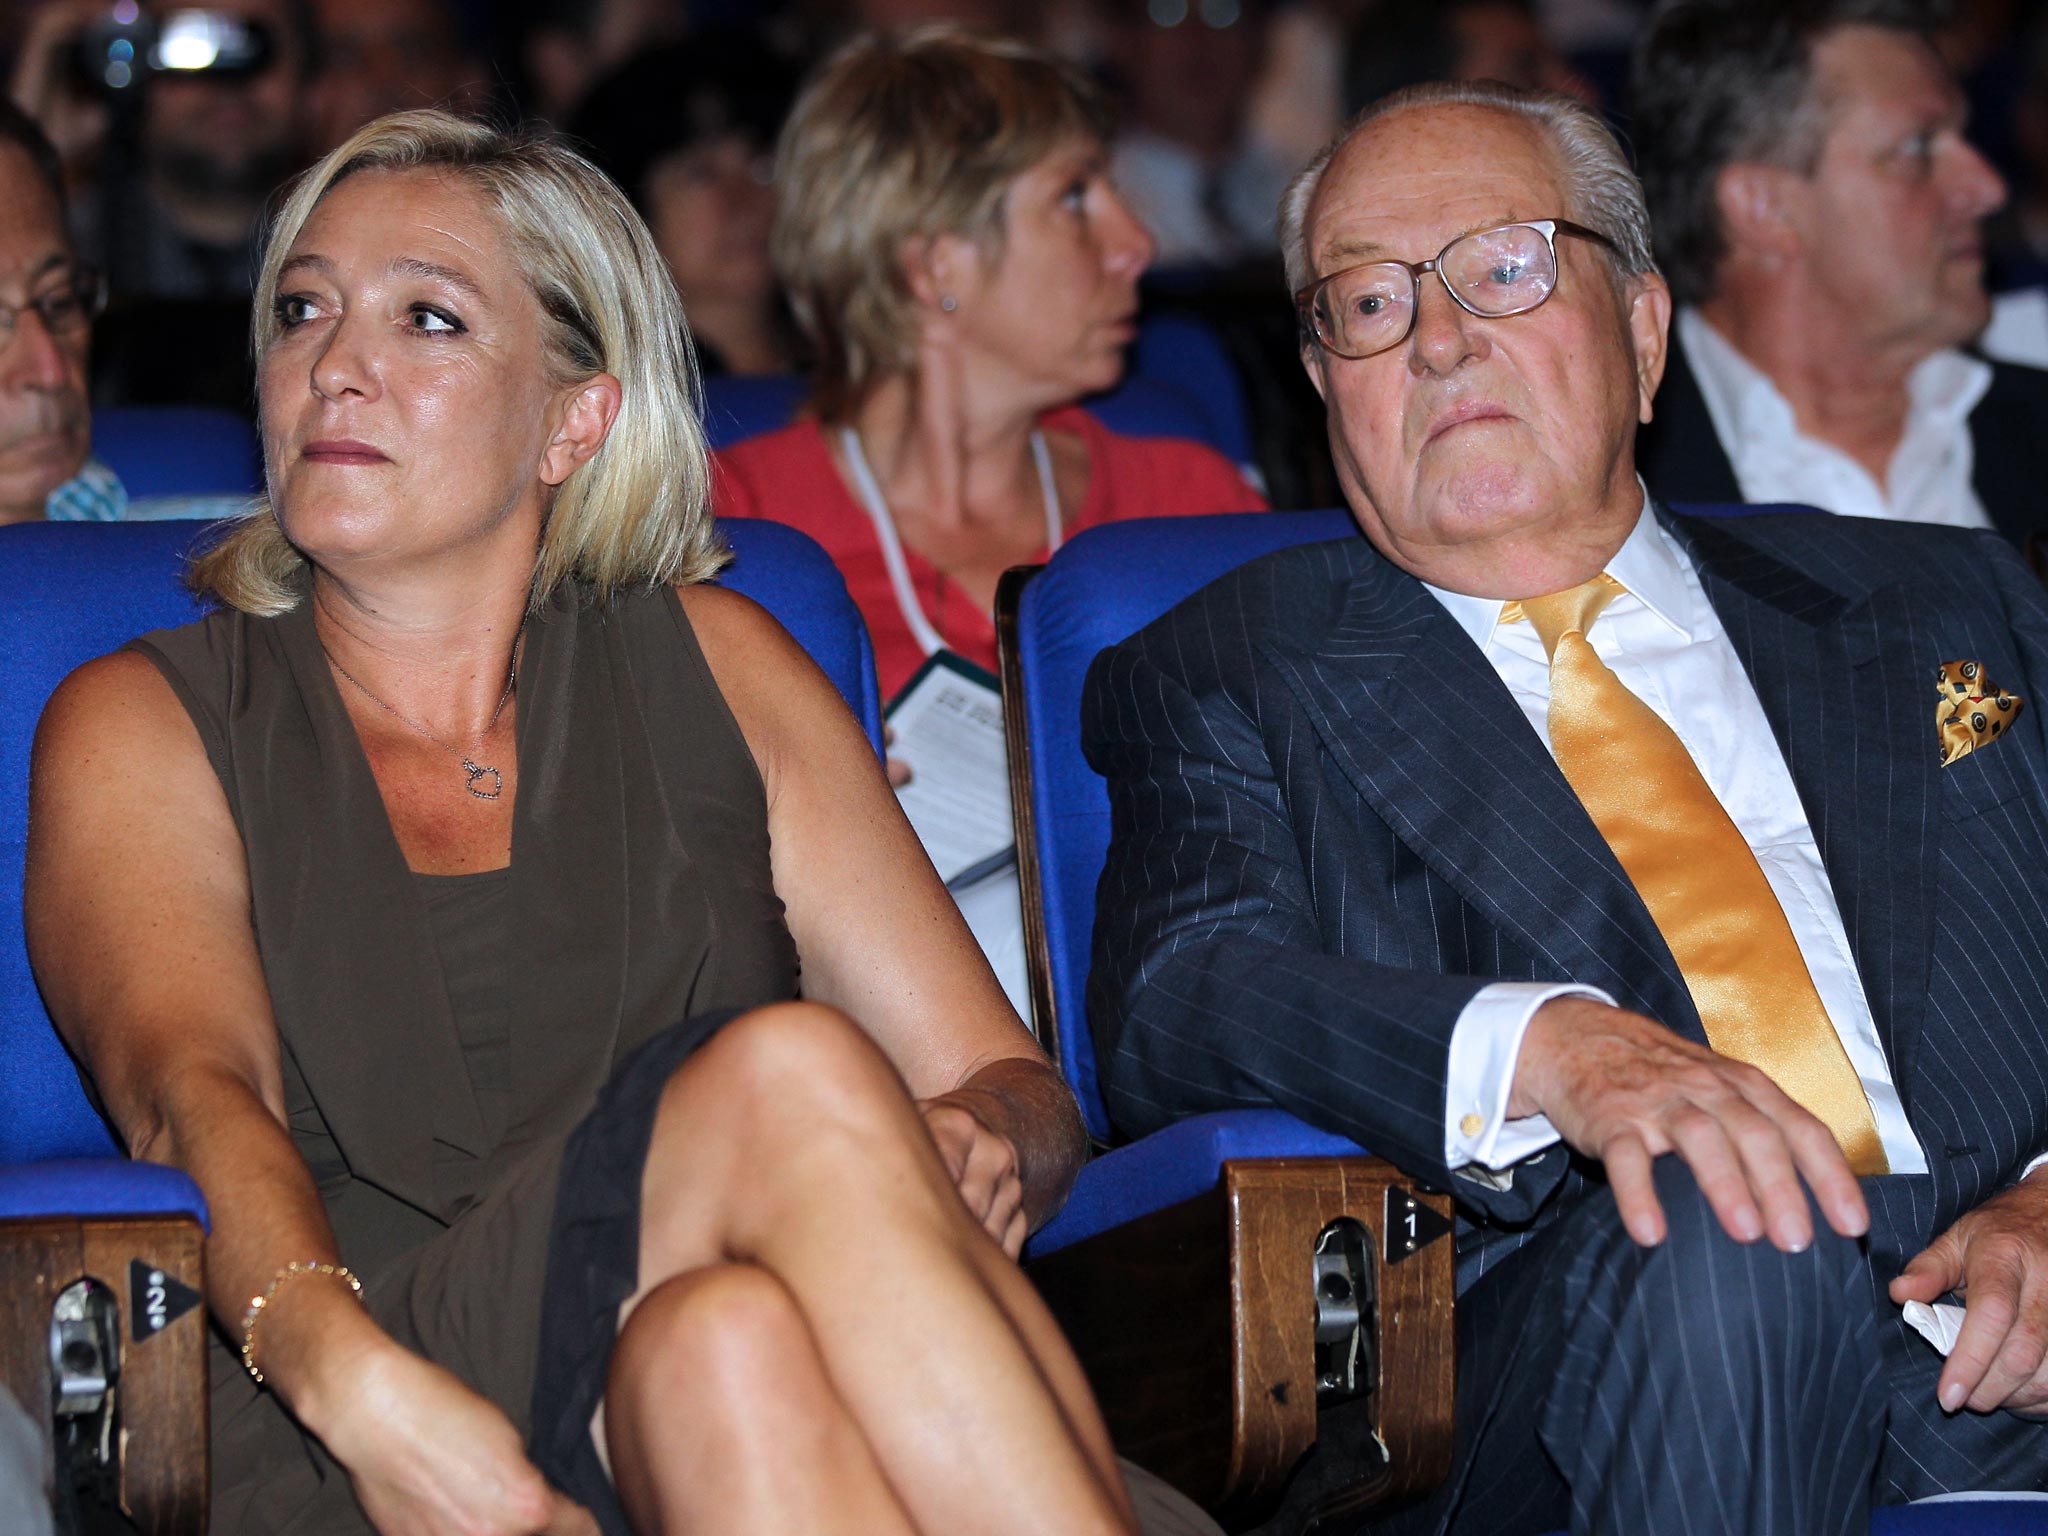 The Front National’s Marine and Jean-Marie Le Pen